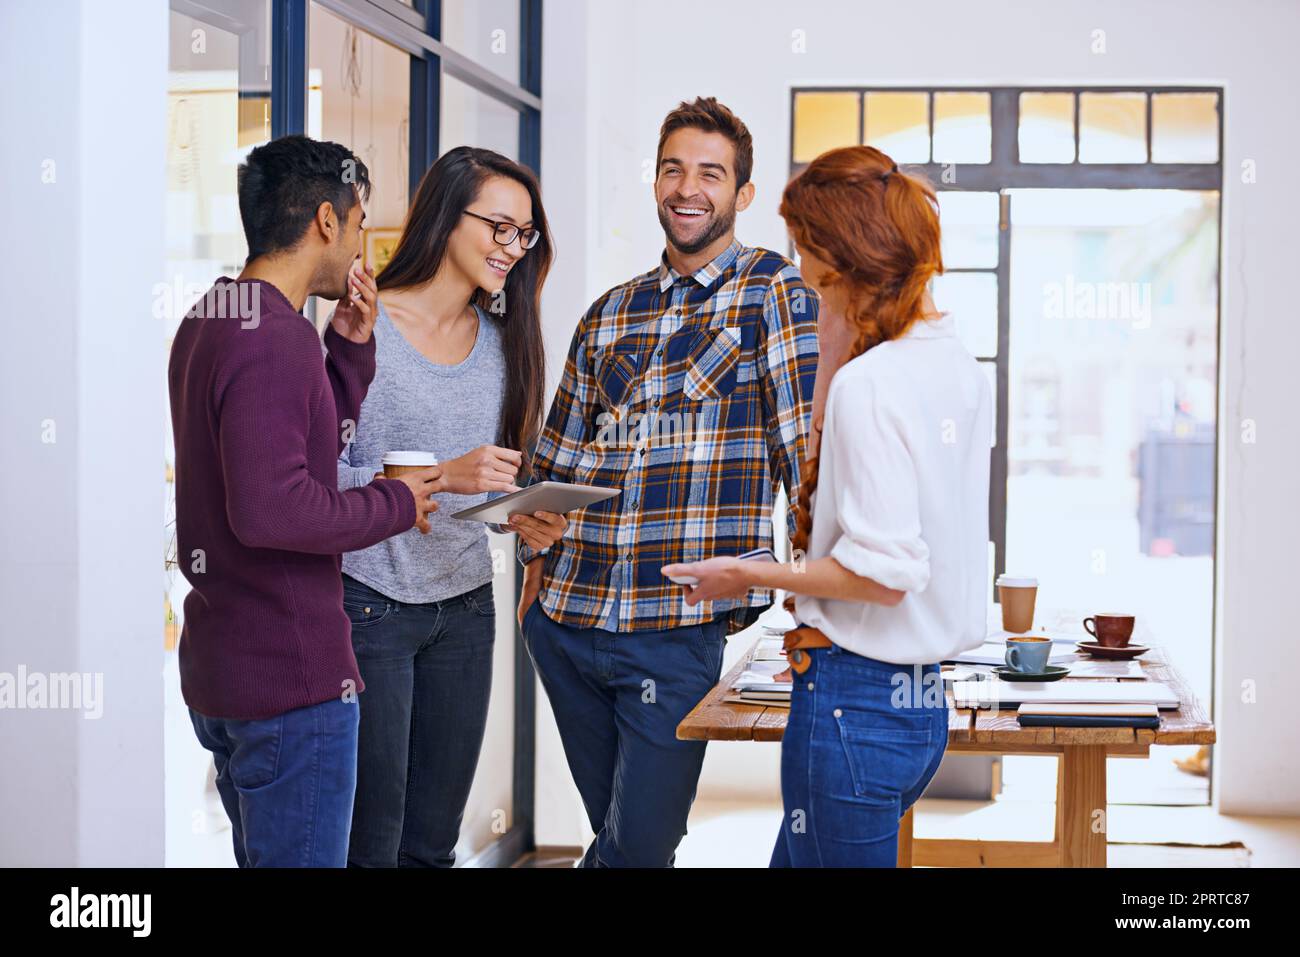 Socializing with the team. four young designers having a discussion in their office. Stock Photo